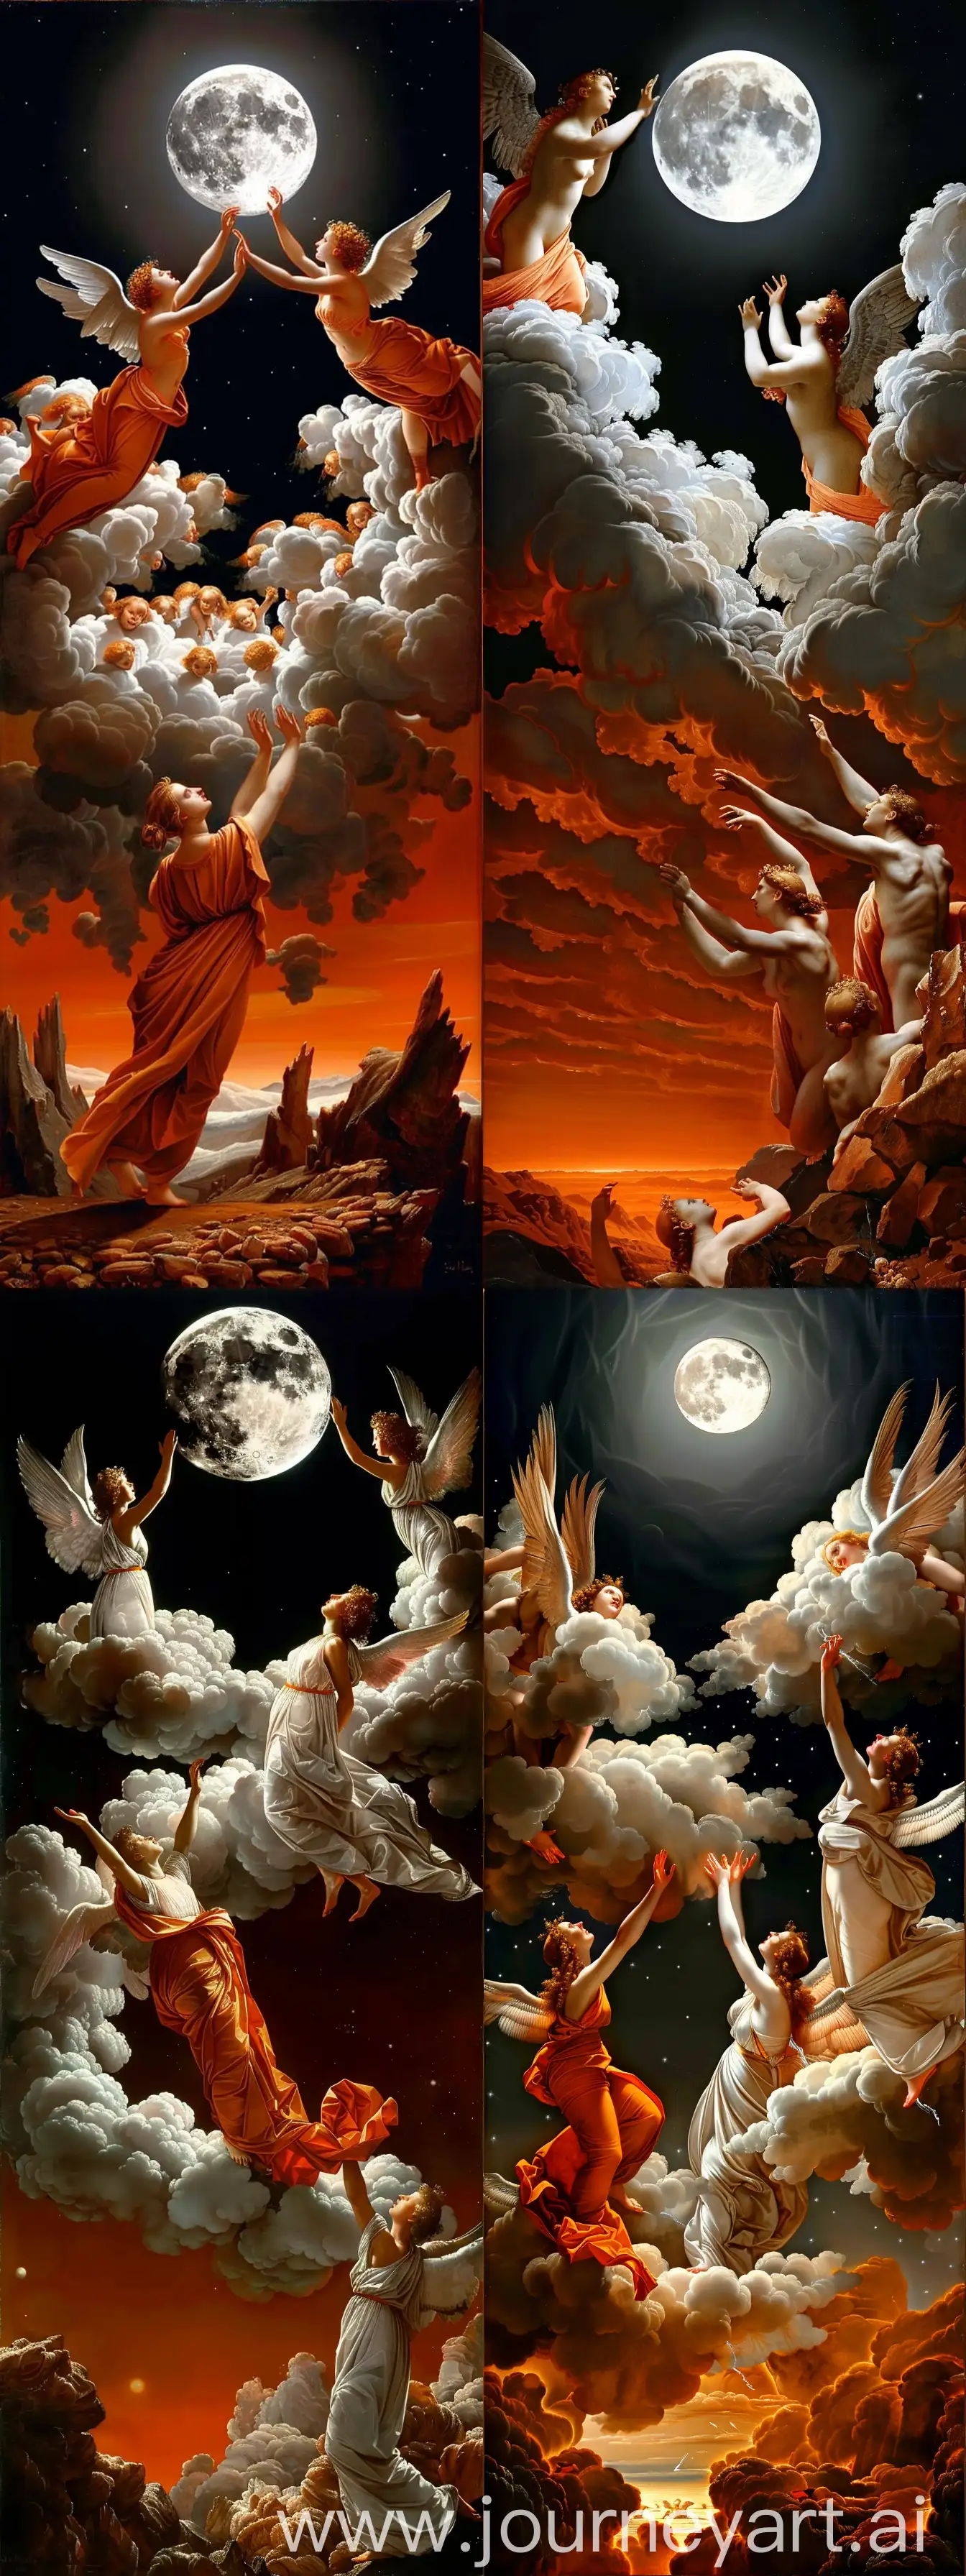 Renaissance-Painting-of-Human-World-Reaching-Up-to-Night-Sky-with-Angels-and-Moon